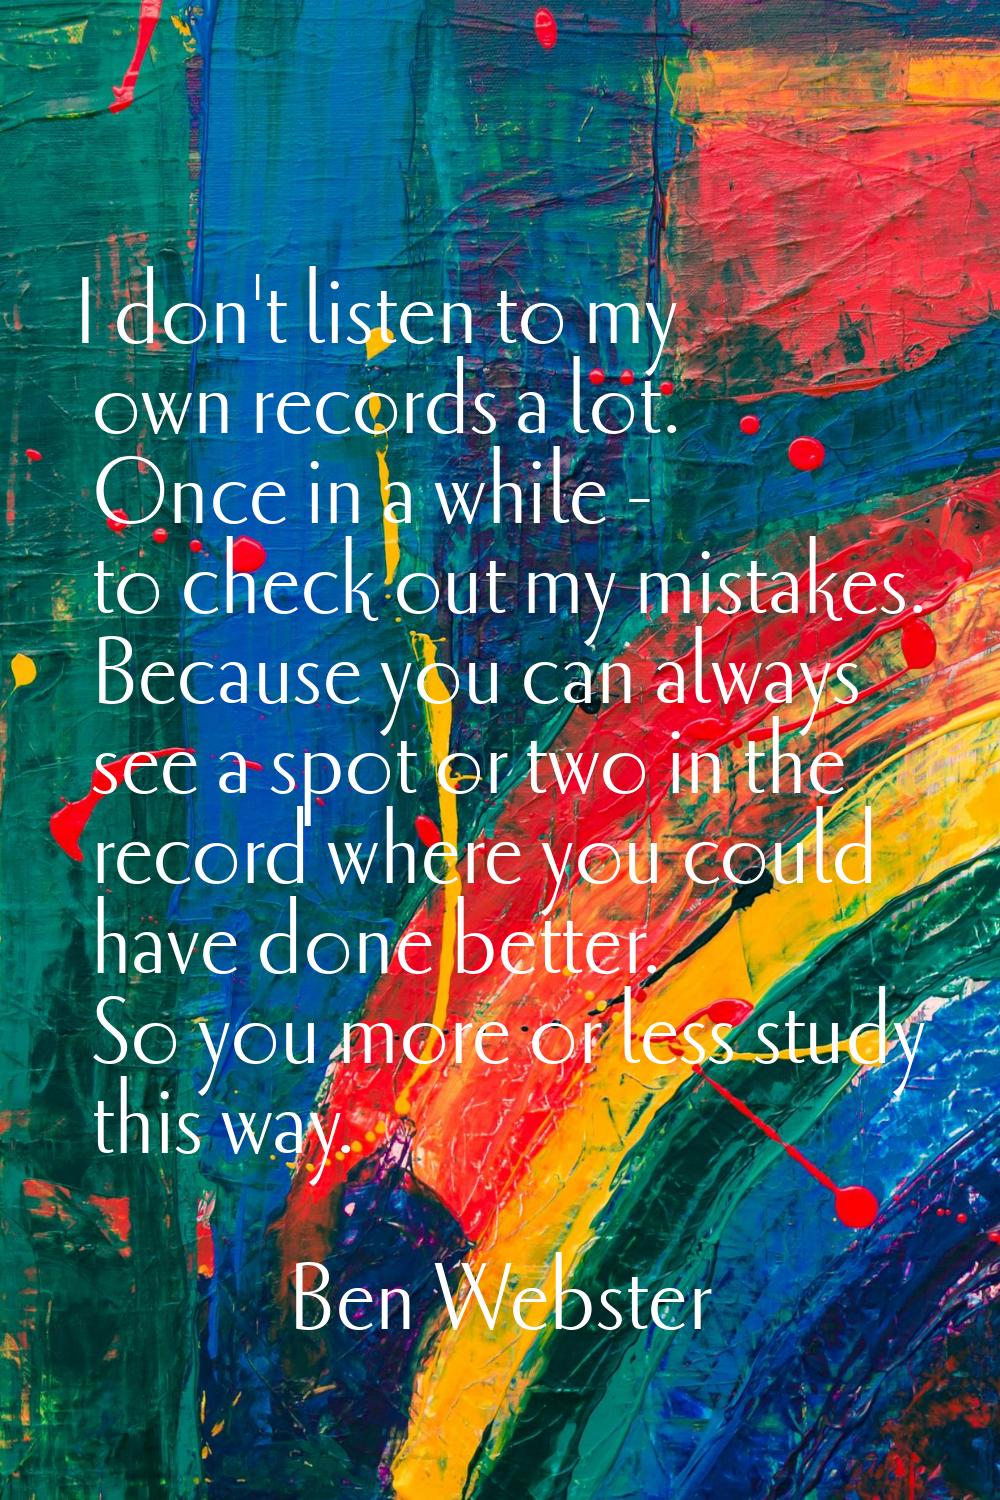 I don't listen to my own records a lot. Once in a while - to check out my mistakes. Because you can